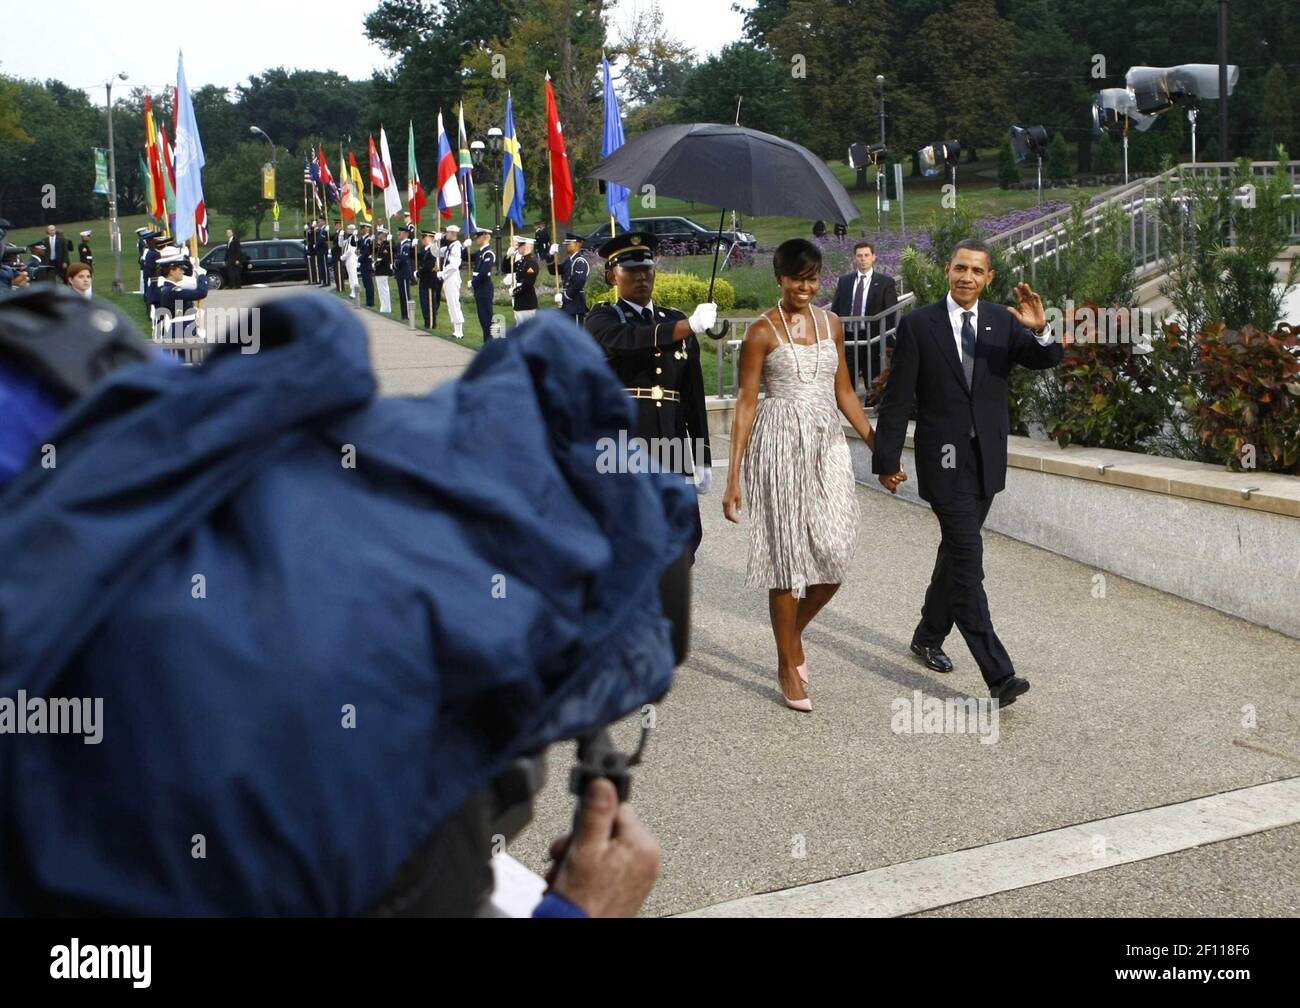 24 September 2009 - Pittsburgh, Pennsylvania - U.S. President Barack Obama and first lady Michelle Obama arrive to the welcoming dinner for G-20 leaders at the Phipps Conservatory on September 24, 2009 in Pittsburgh, Pennsylvania. Heads of state from the world's leading economic powers arrived today for the two-day G-20 summit held at the David L. Lawrence Convention Center aimed at promoting economic growth. Photo Credit: Win McNamee/Pool/Sipa Press/0909251418 Stock Photo